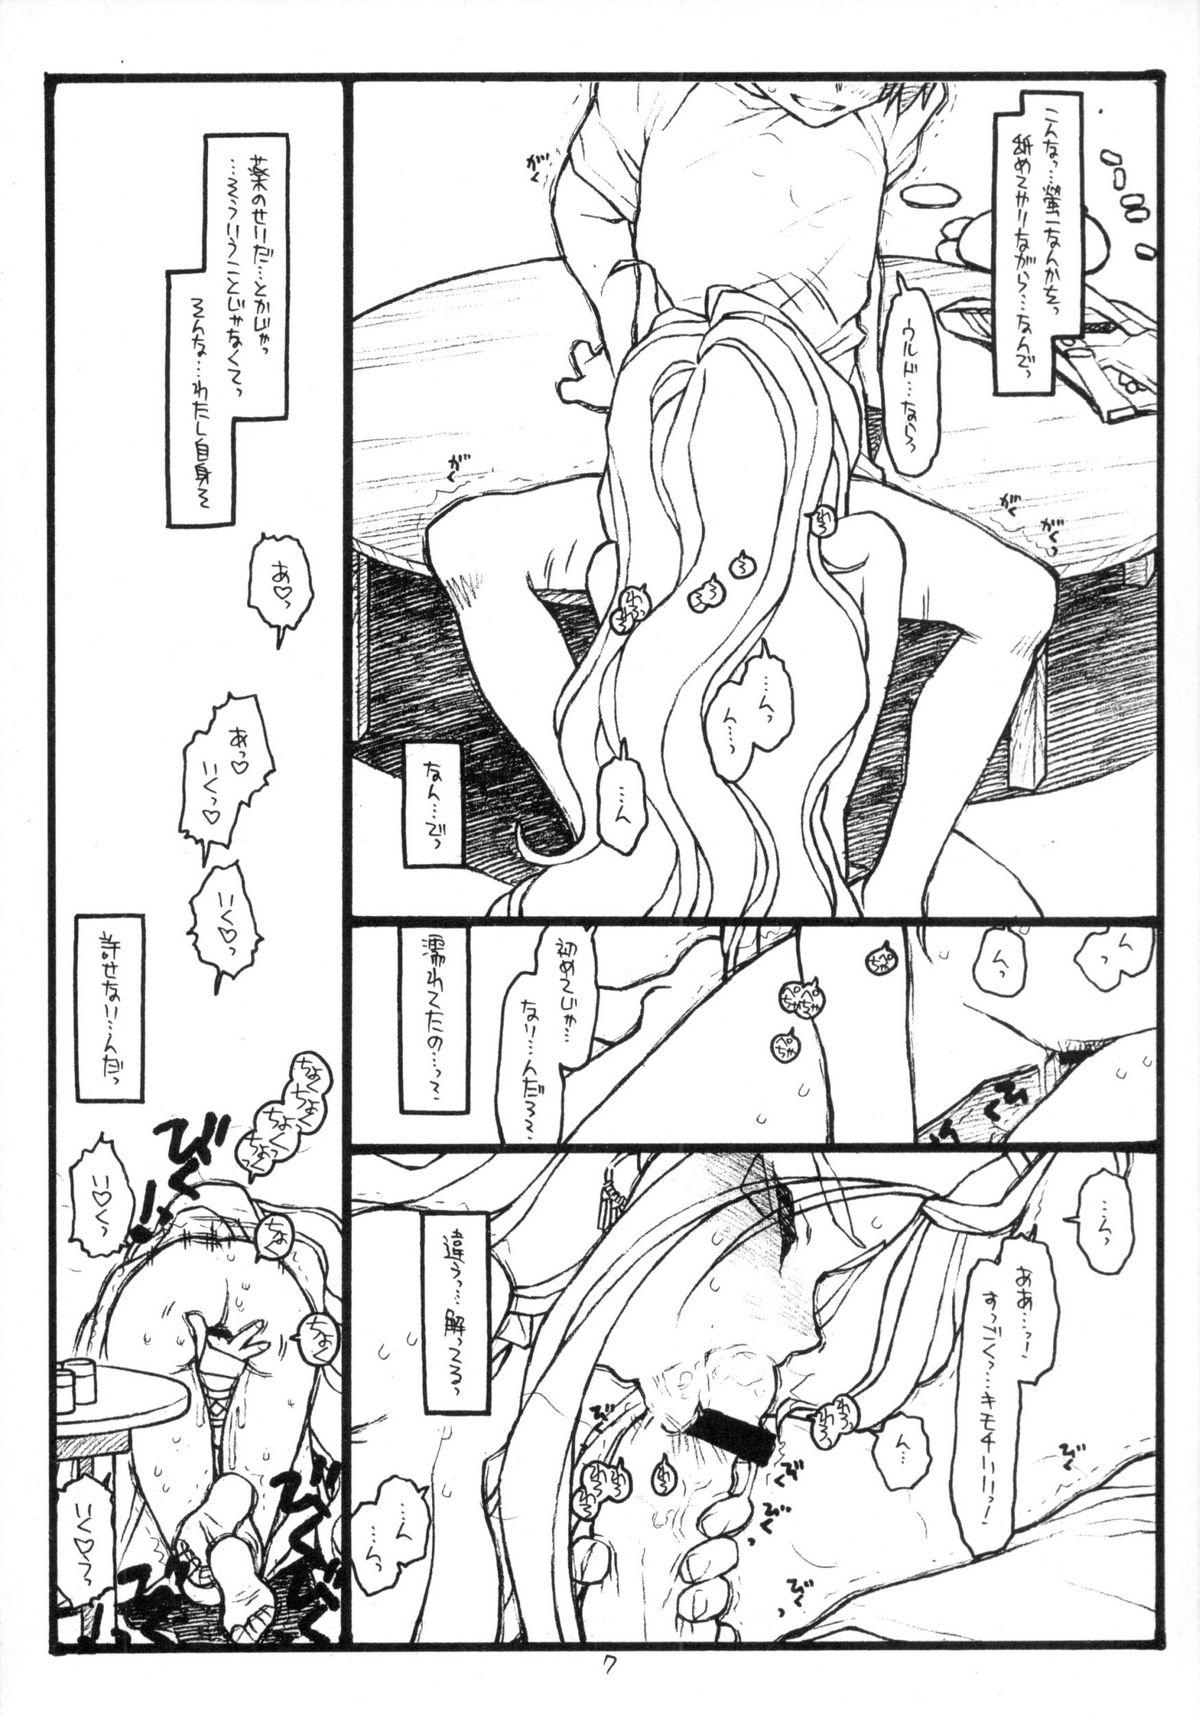 Rimming Oh My Sadness Episode #6.1 - Ah my goddess Sharing - Page 6